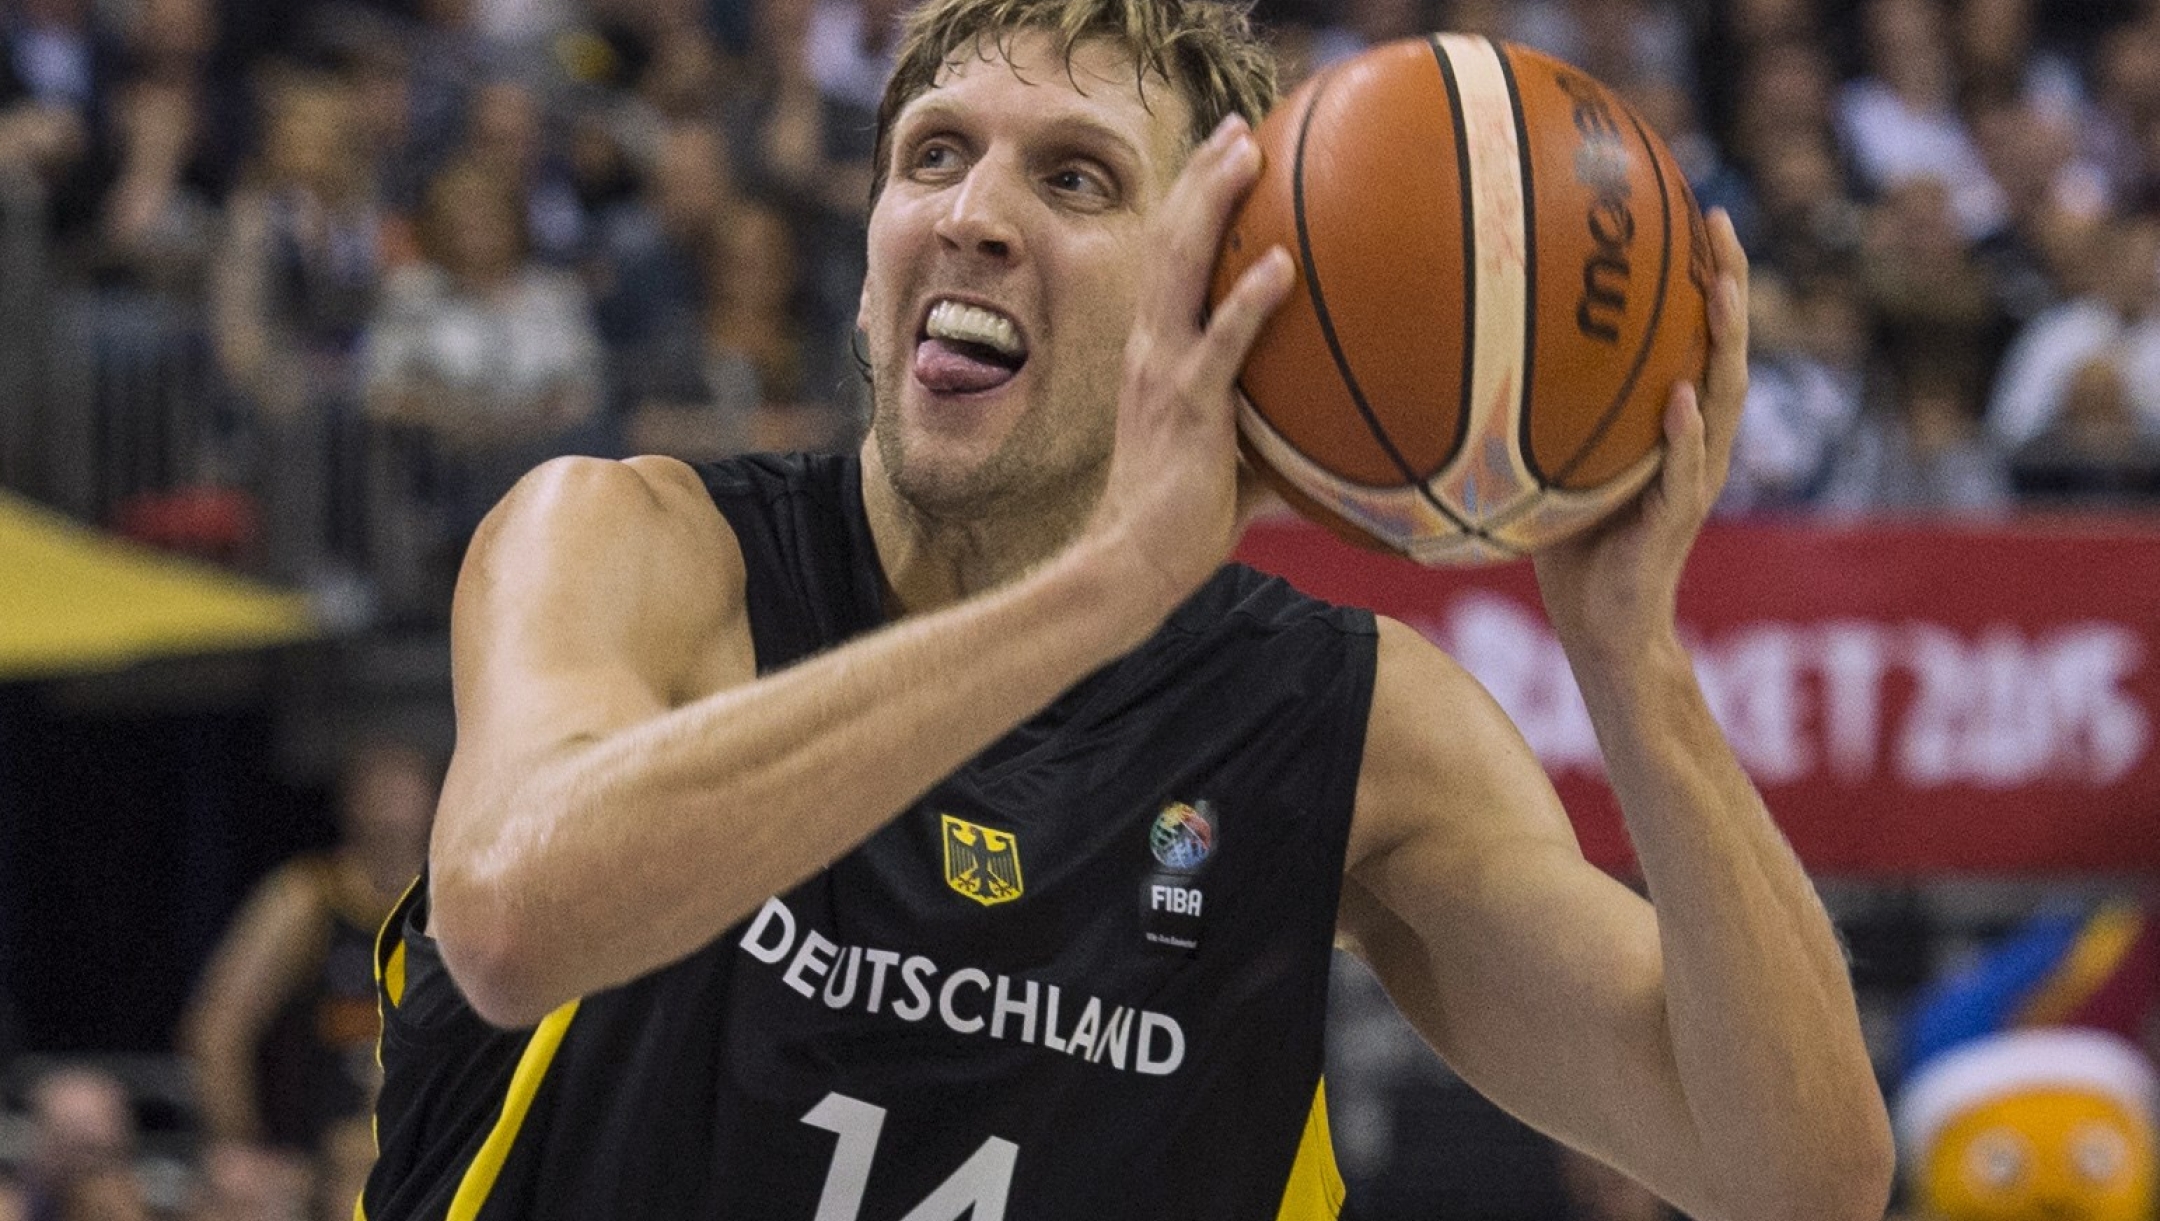 Germany's Dirk Nowitzki makes a pass during the EuroBasket group B match Serbia vs Germany in Berlin September 6, 2015. AFP PHOTO / JOHN MACDOUGALL